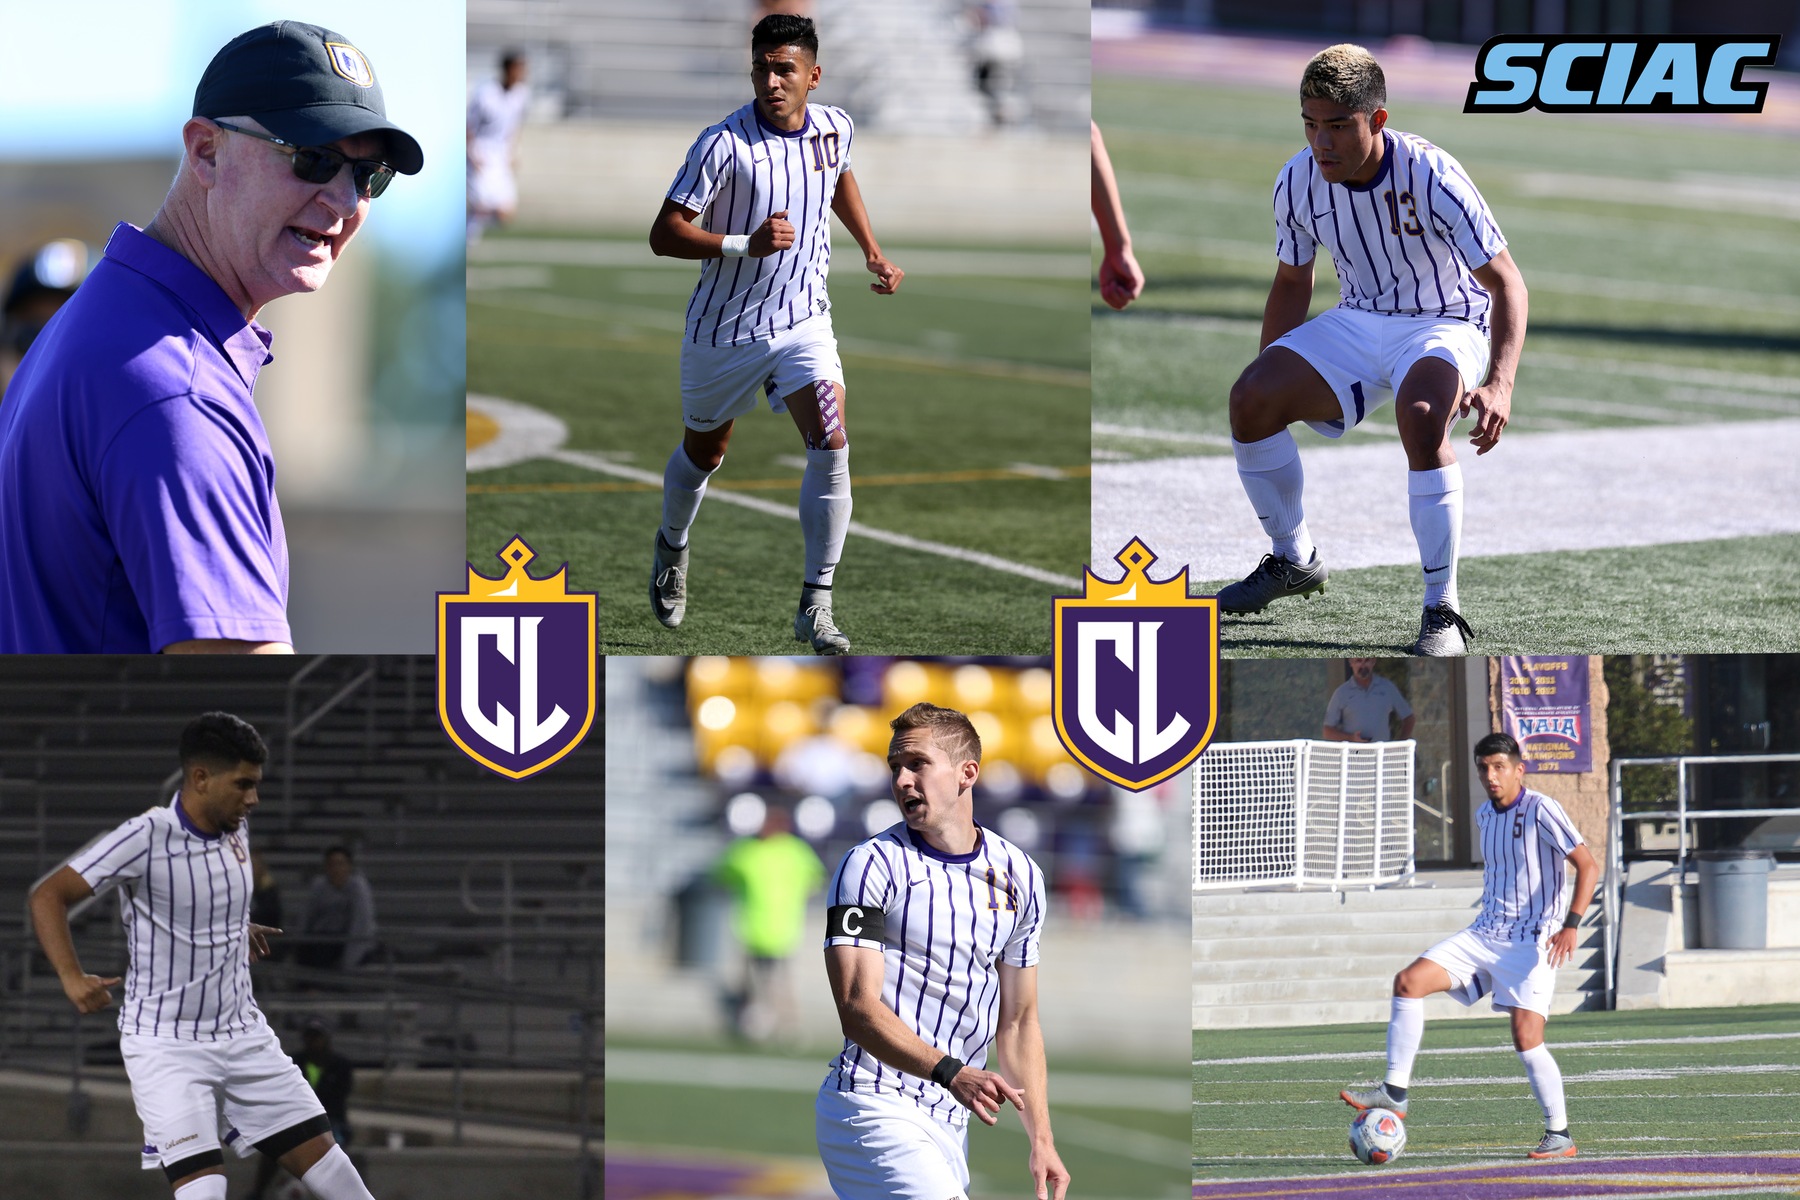 Five Kingsmen Earn All-SCIAC; Four on First Team and One on Second Team